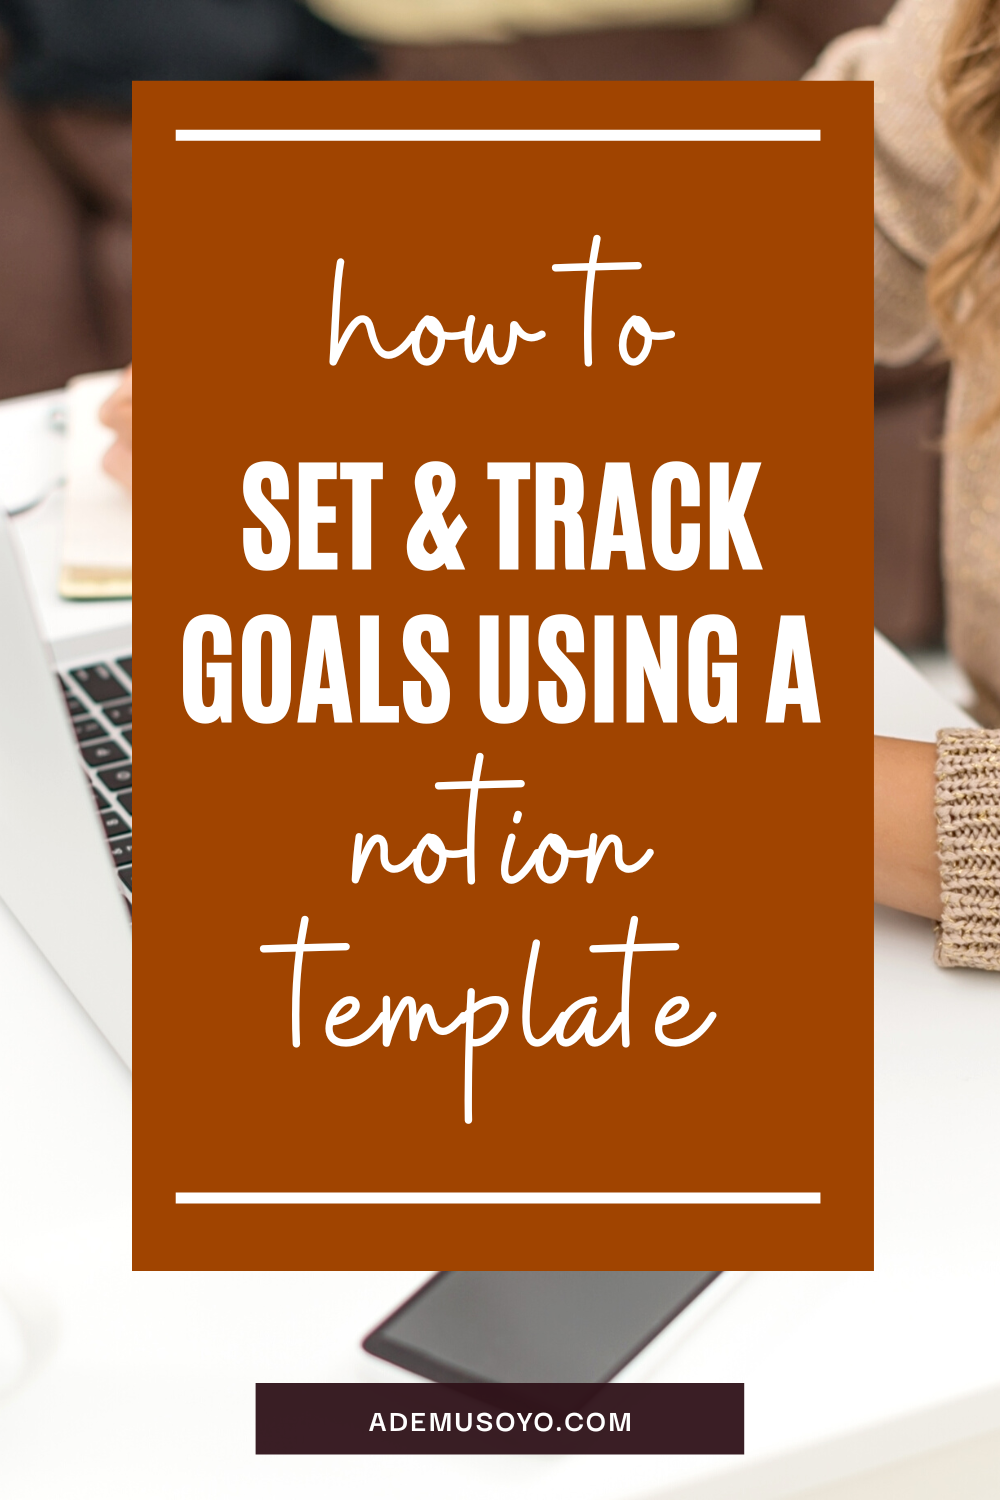 Setting and Tracking Goals Using a Notion Template, why goal setting is important, tracking goals, notion templates, aesthetic notion templates, notion app, notion api, free notion templates, goal tracker, habit tracker, notion goal template, time tracking, notion tracker, notion goal setting template, notion templates to do list, how to use notion template